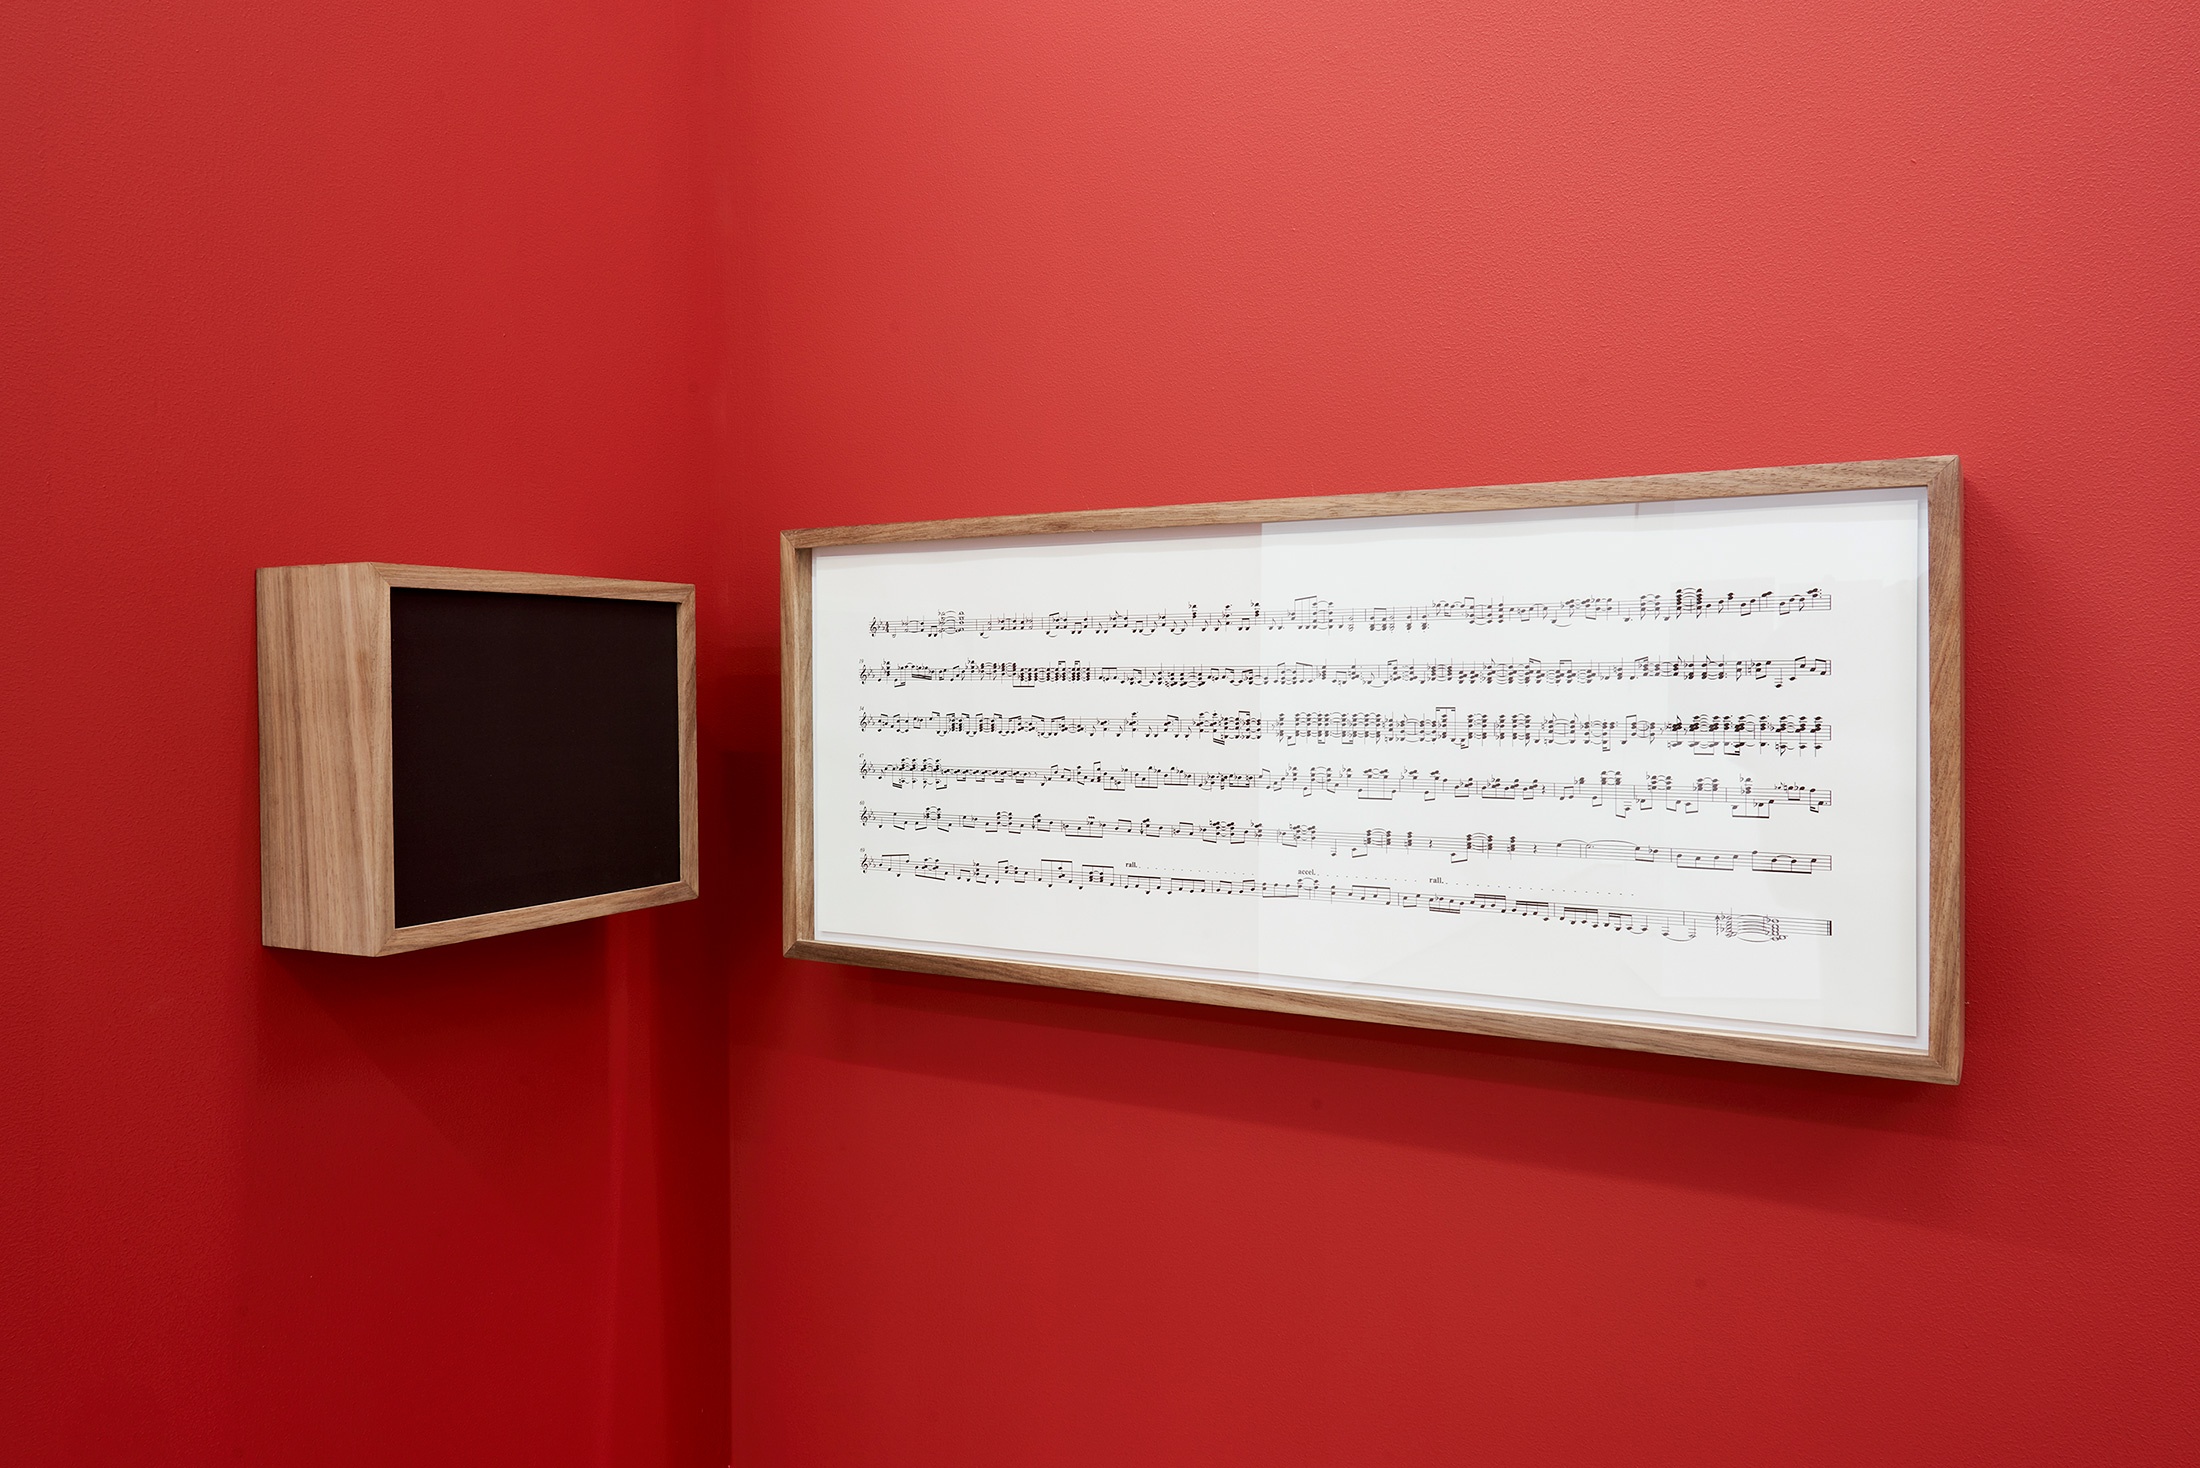 Installation photograph that shows Iñaki Bonillas’ wall-mounted installation ‘The Return to the Origin 5’ in the corner of two red movable gallery walls. On the left is a wood-framed speaker box and on the right, a wood-framed musical score.
